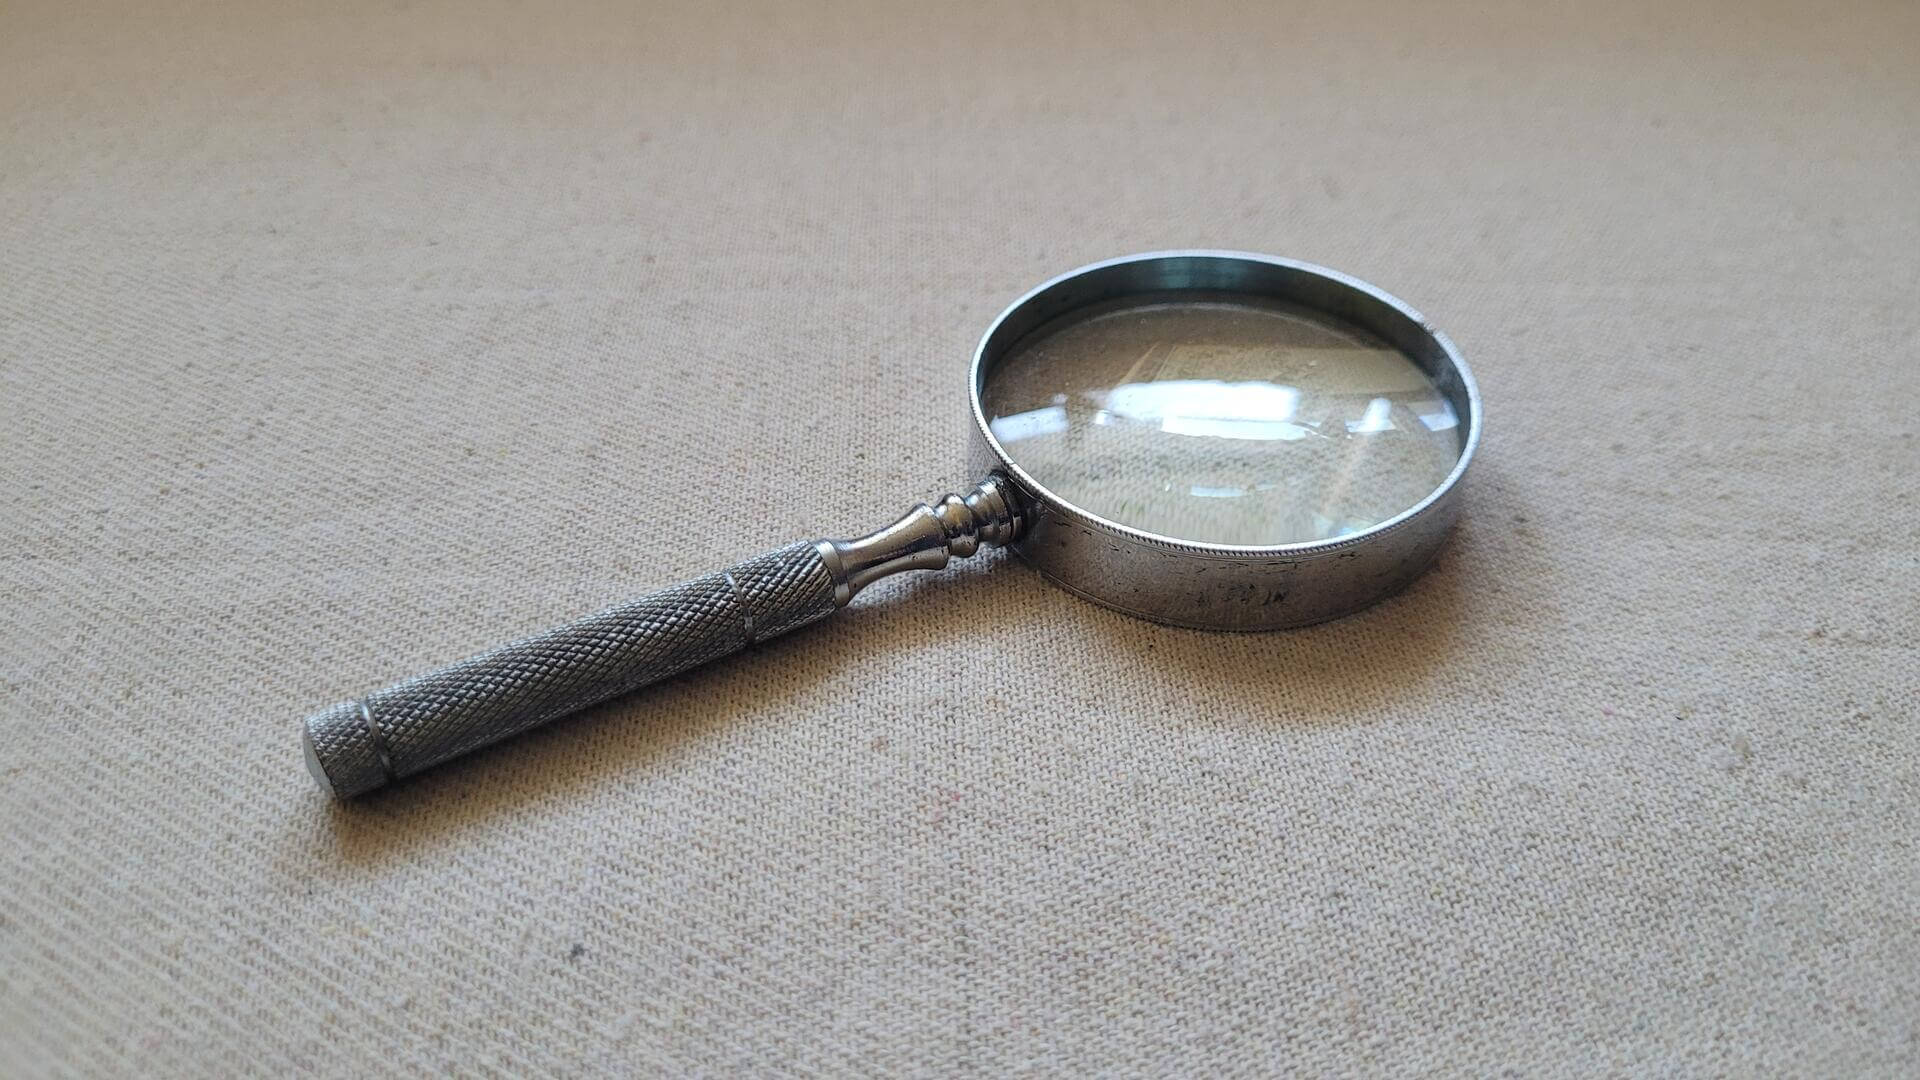 magnifying-glass-5-inch-knurled-stainless-steel-handle-2-inch-lens-antique-vintage-collectible-desktop-office-visual-aid-tools